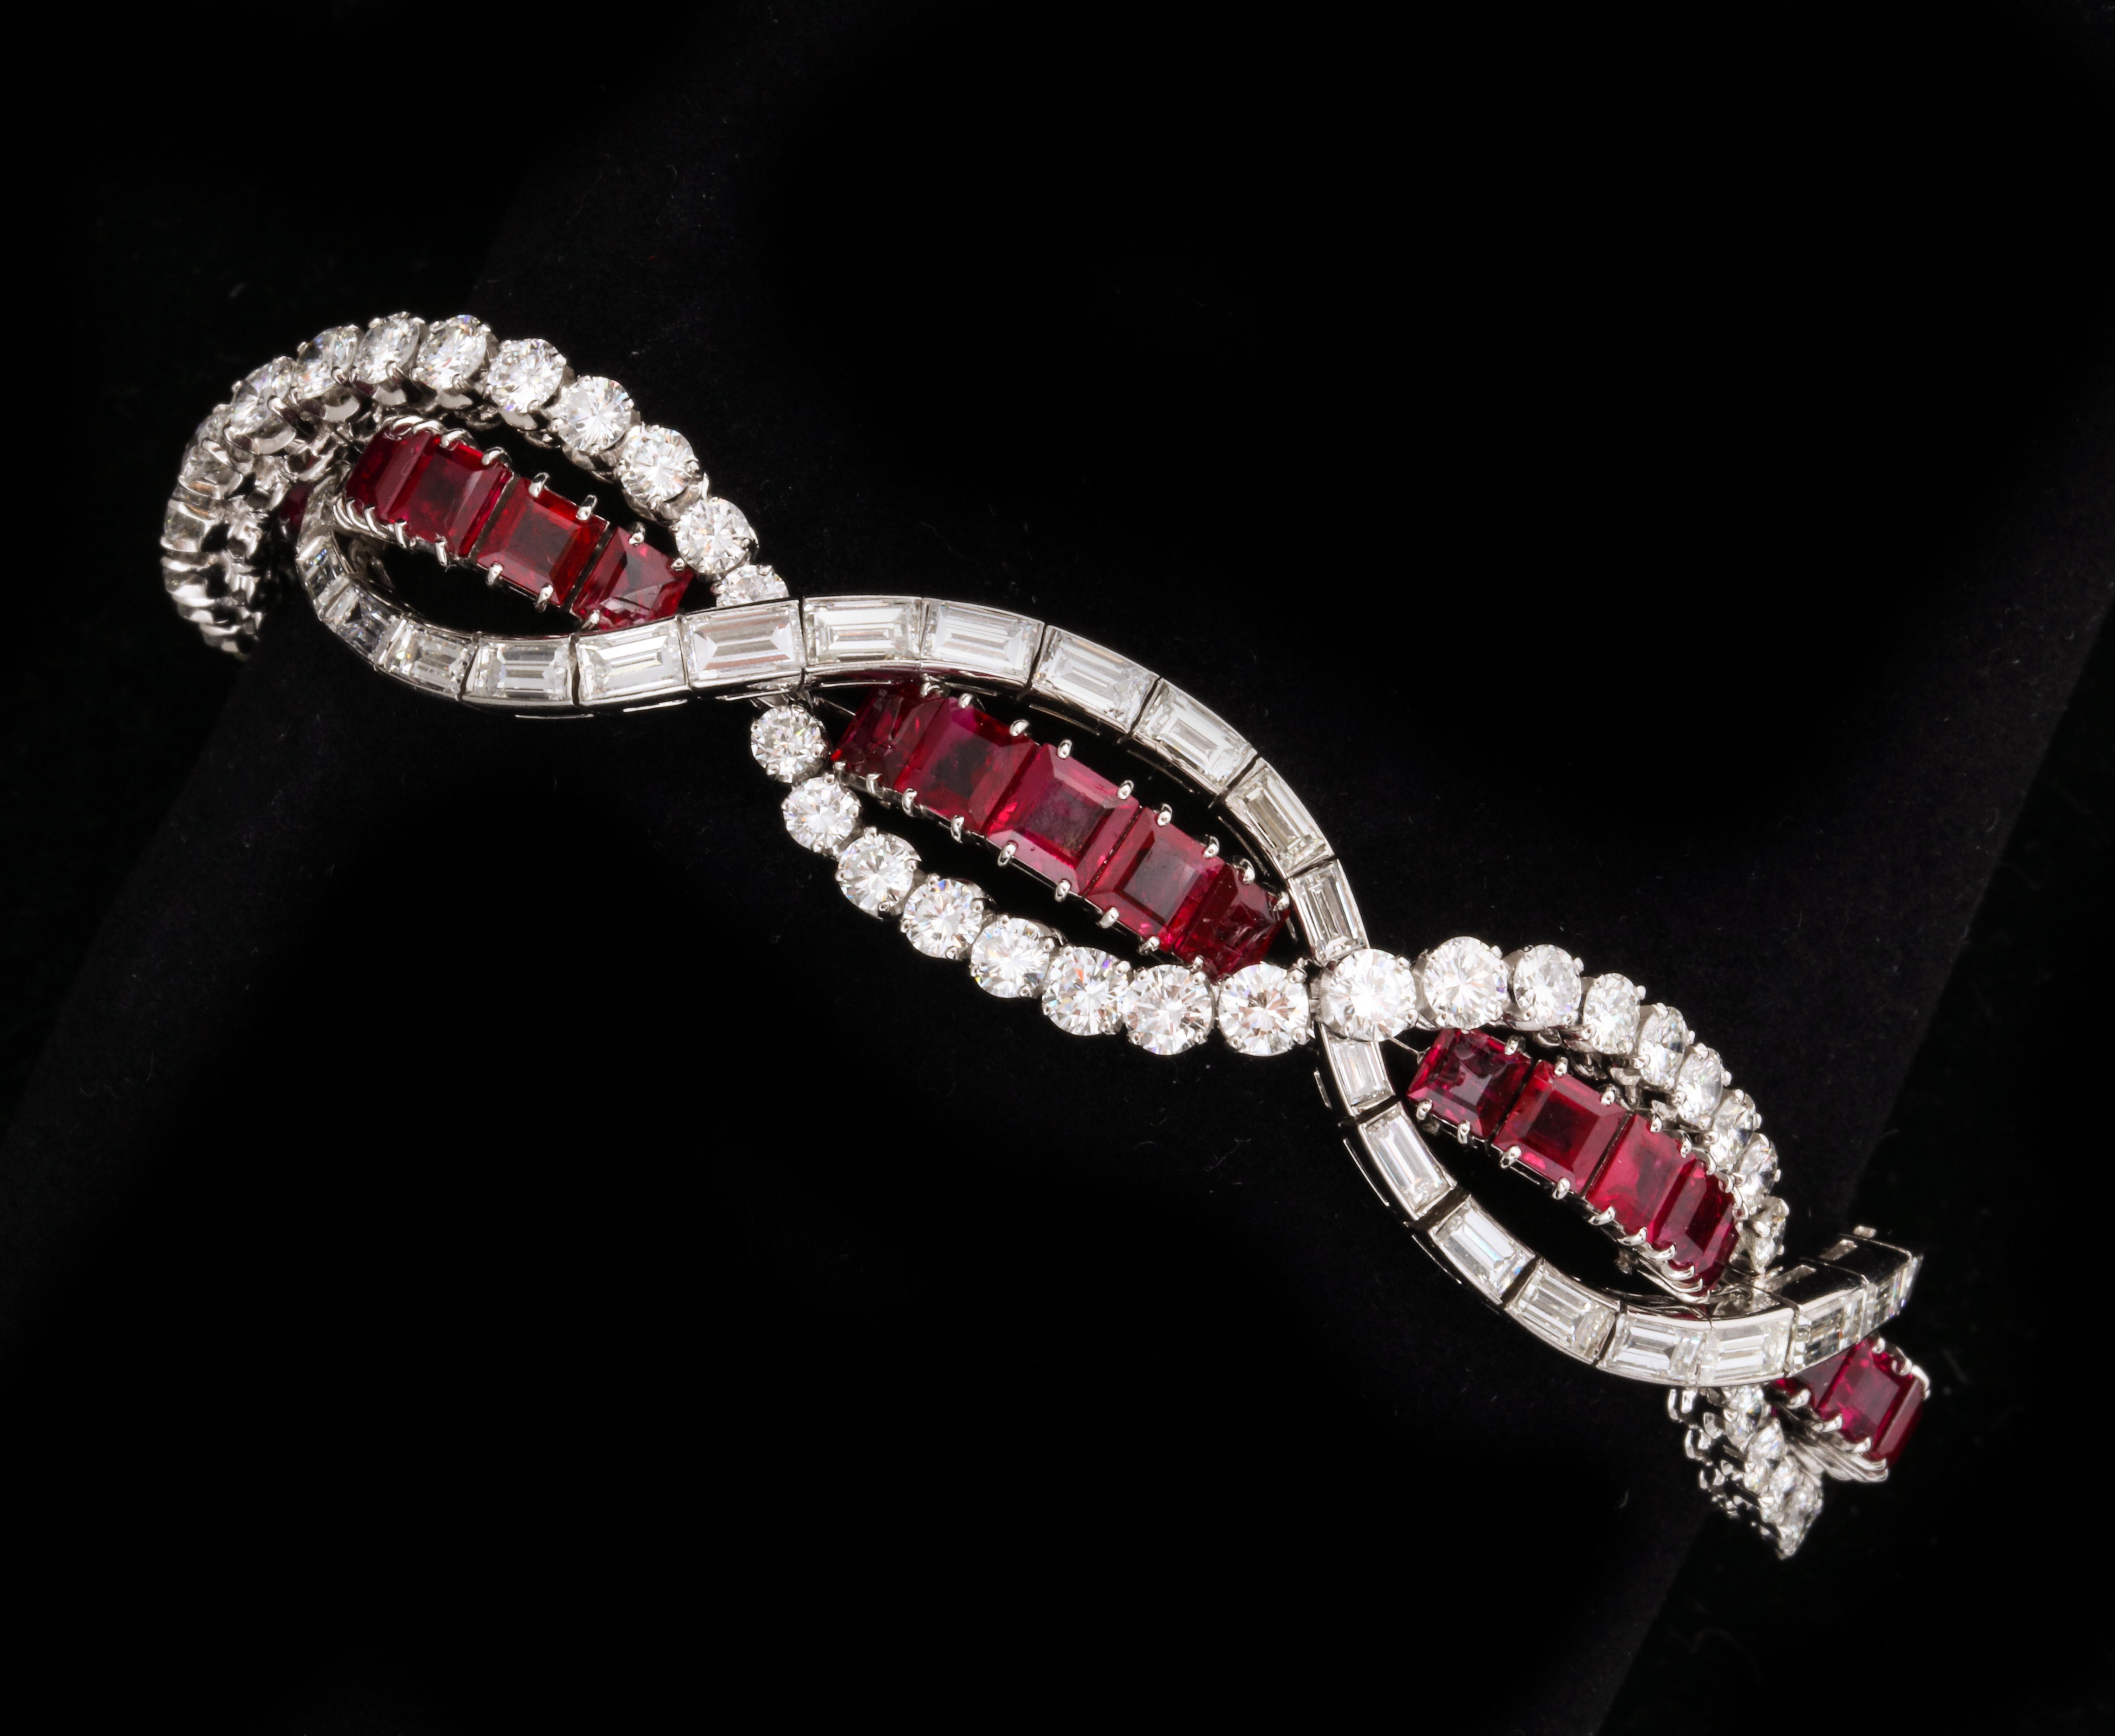 A ruby bracelet  with diamonds spiraling around it in a DNA like sequence.

Made circa 1920